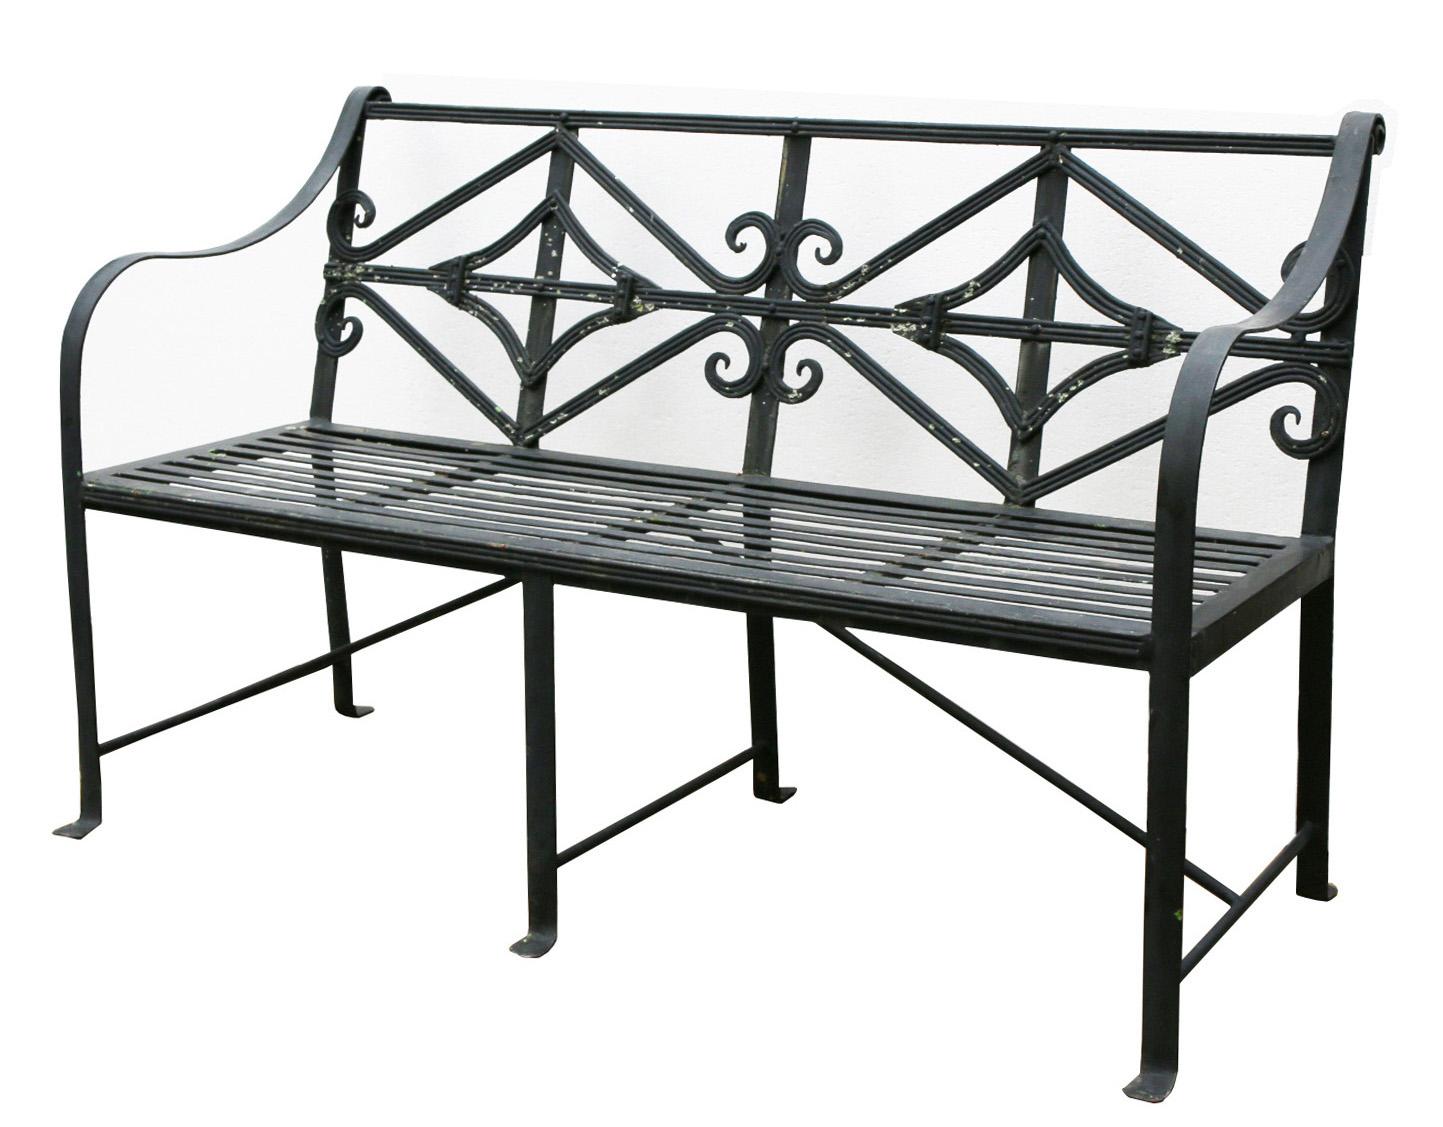 A beautiful Blacksmith made, three seat strapwork garden bench. Finished in old black paint.
Additional Dimensions

Seat width 150 cm Depth 47 cm.